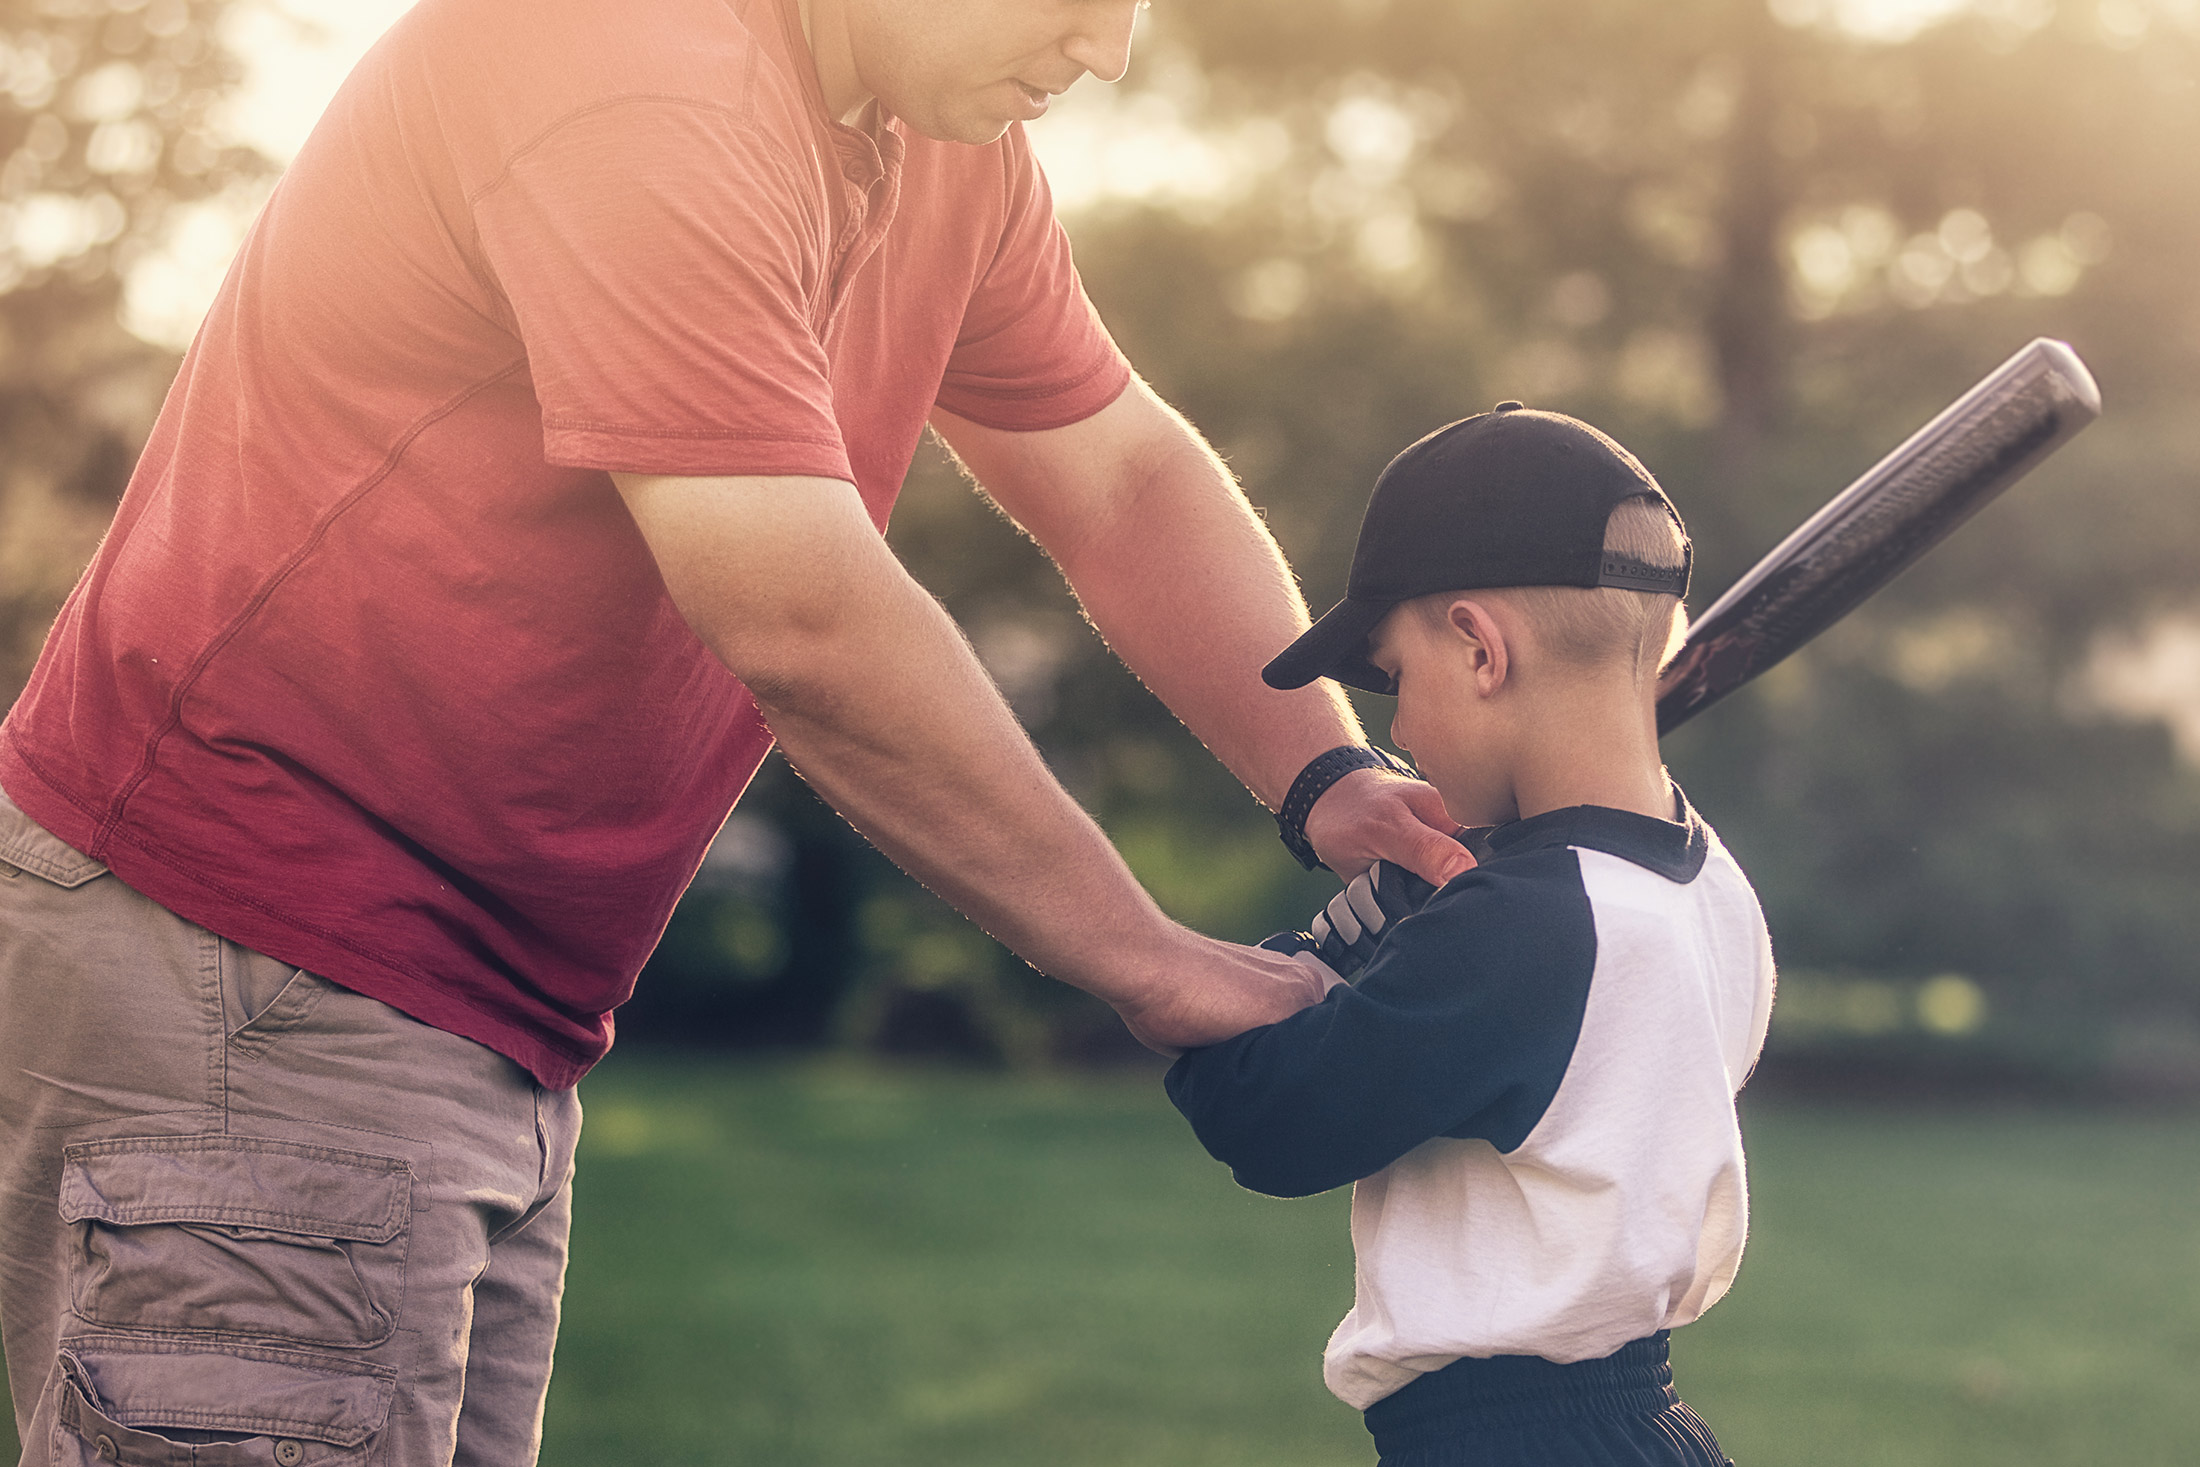 teaching kids motivation in baseball without pressure